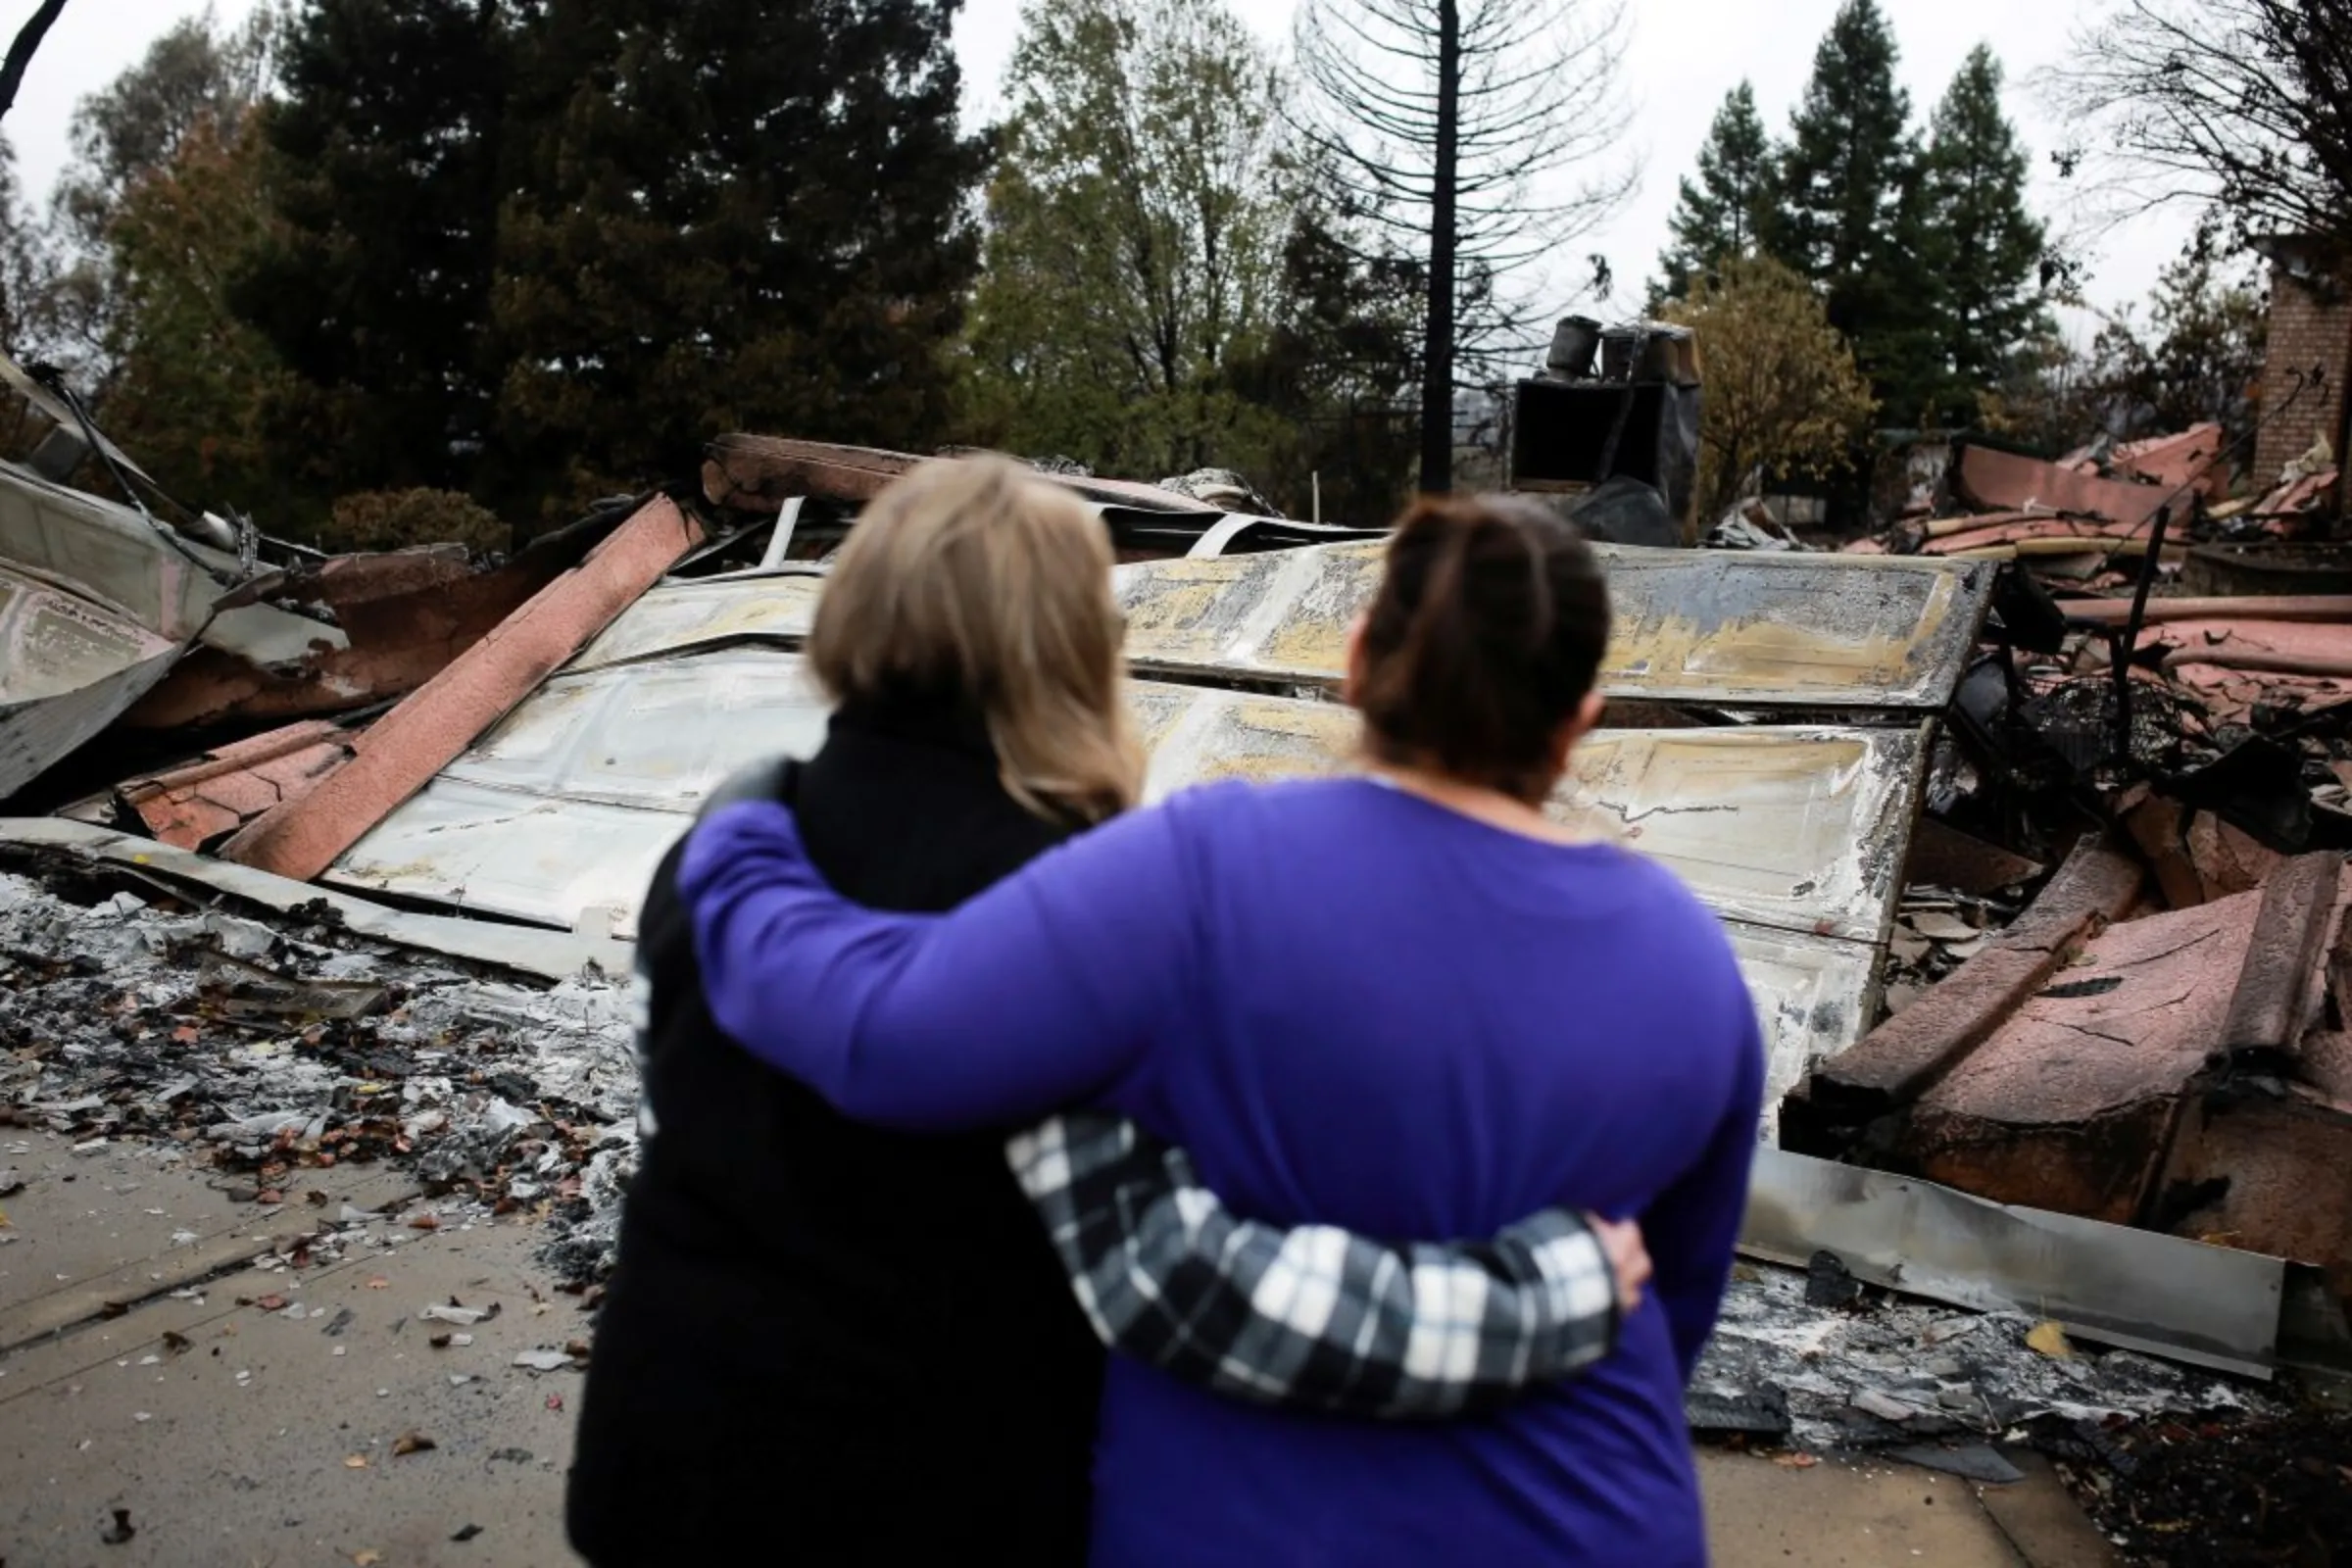 Neighbours comfort each other in front of the remains of a home after returning for the first time since the Camp Fire in Paradise, California, U.S. November 22, 2018. REUTERS/Elijah Nouvelage